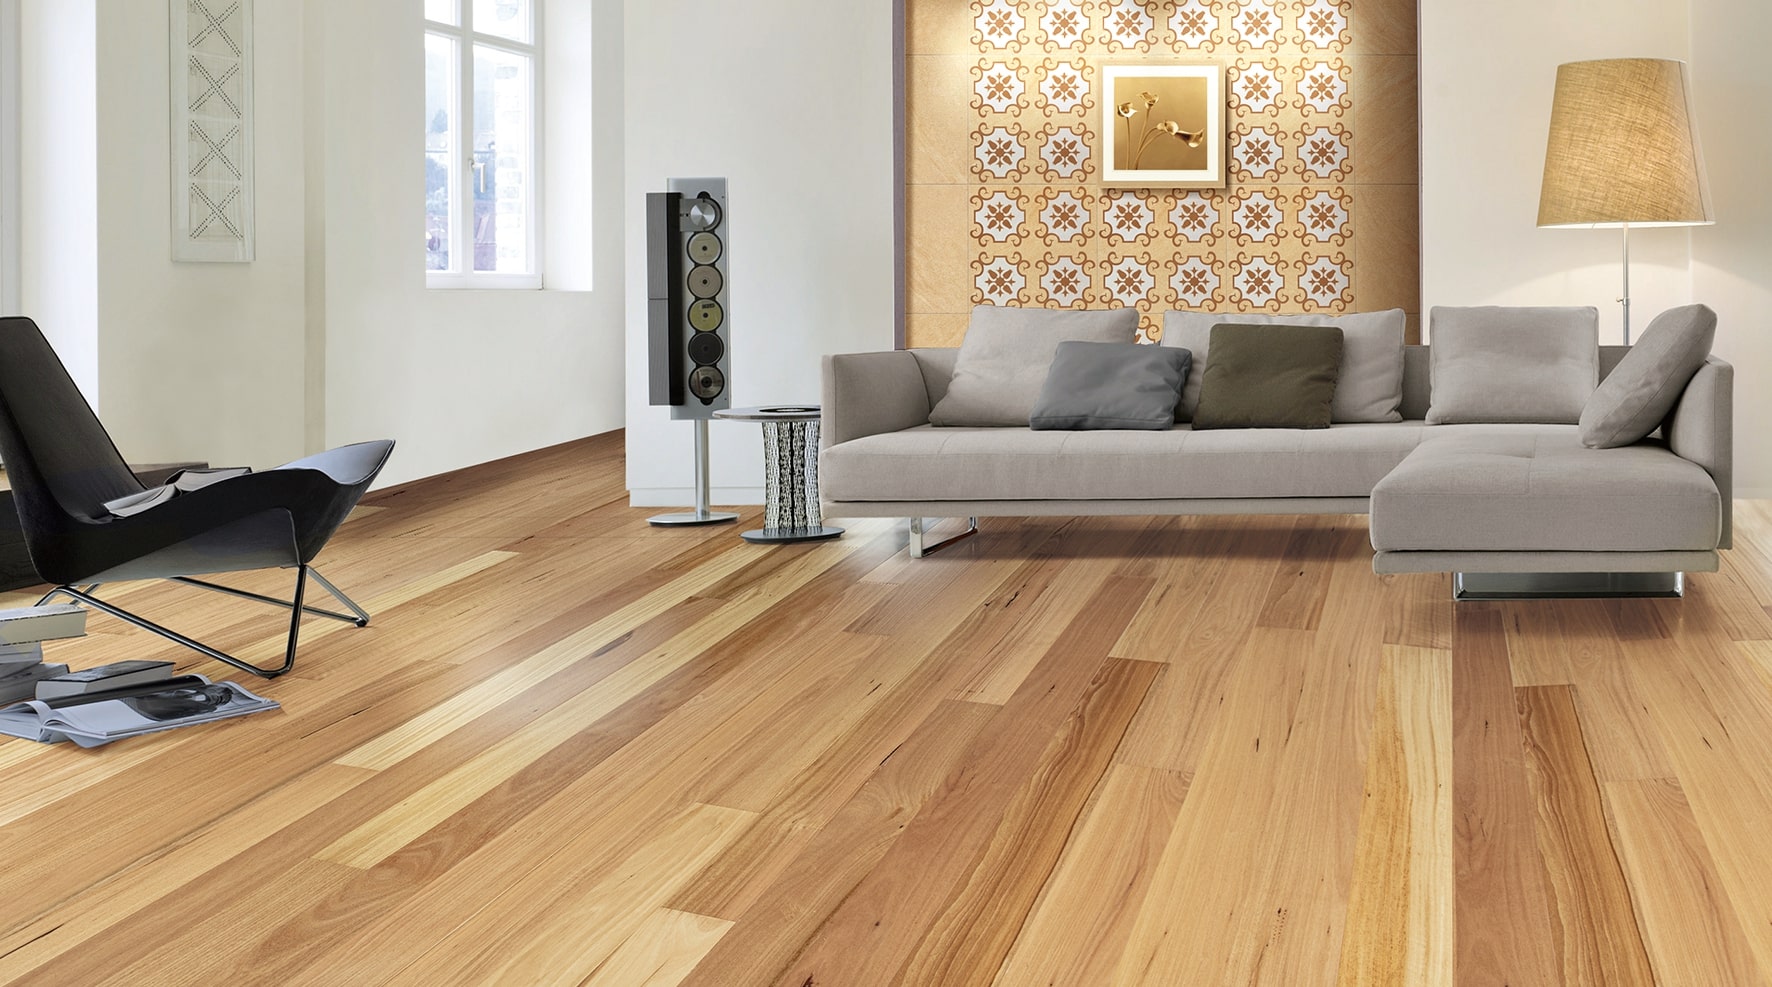 What are the factors to consider when choosing the flooring for your home?